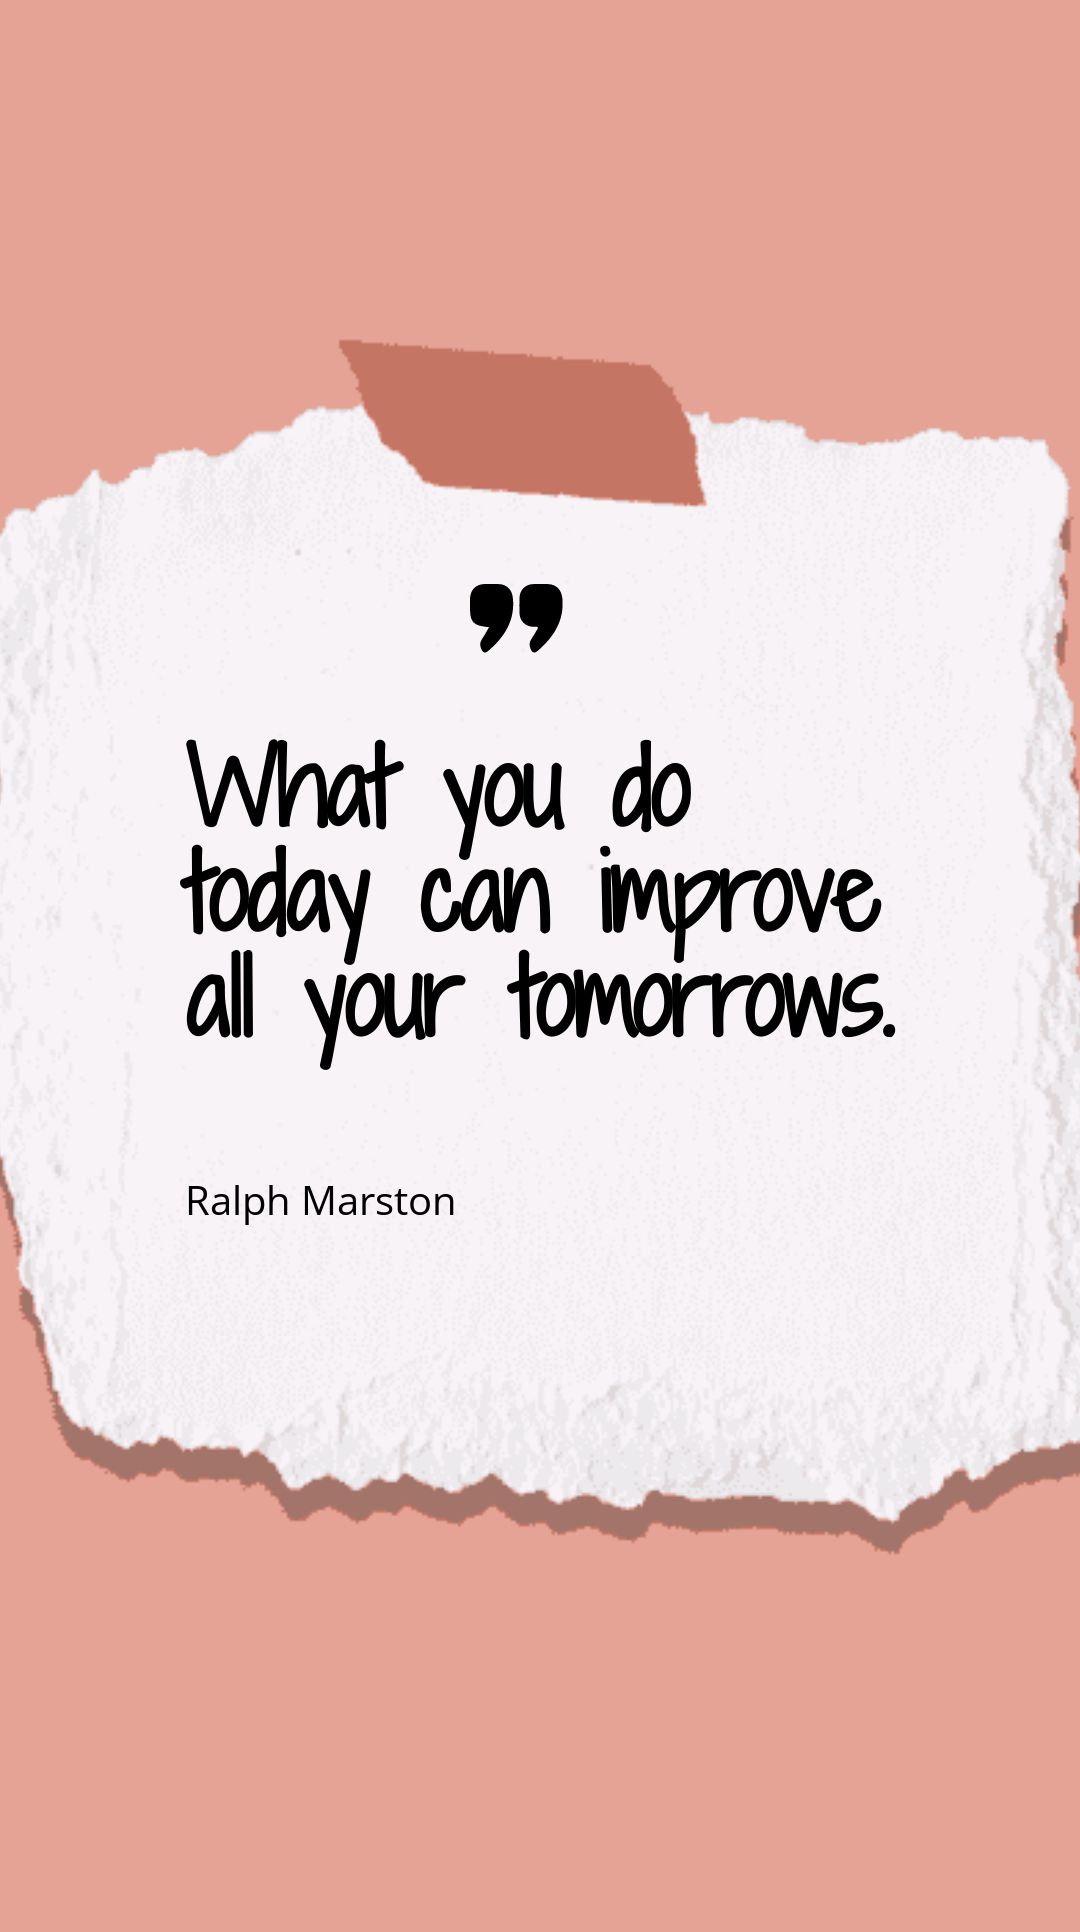 Ralph Marston - What you do today can improve all your tomorrows.